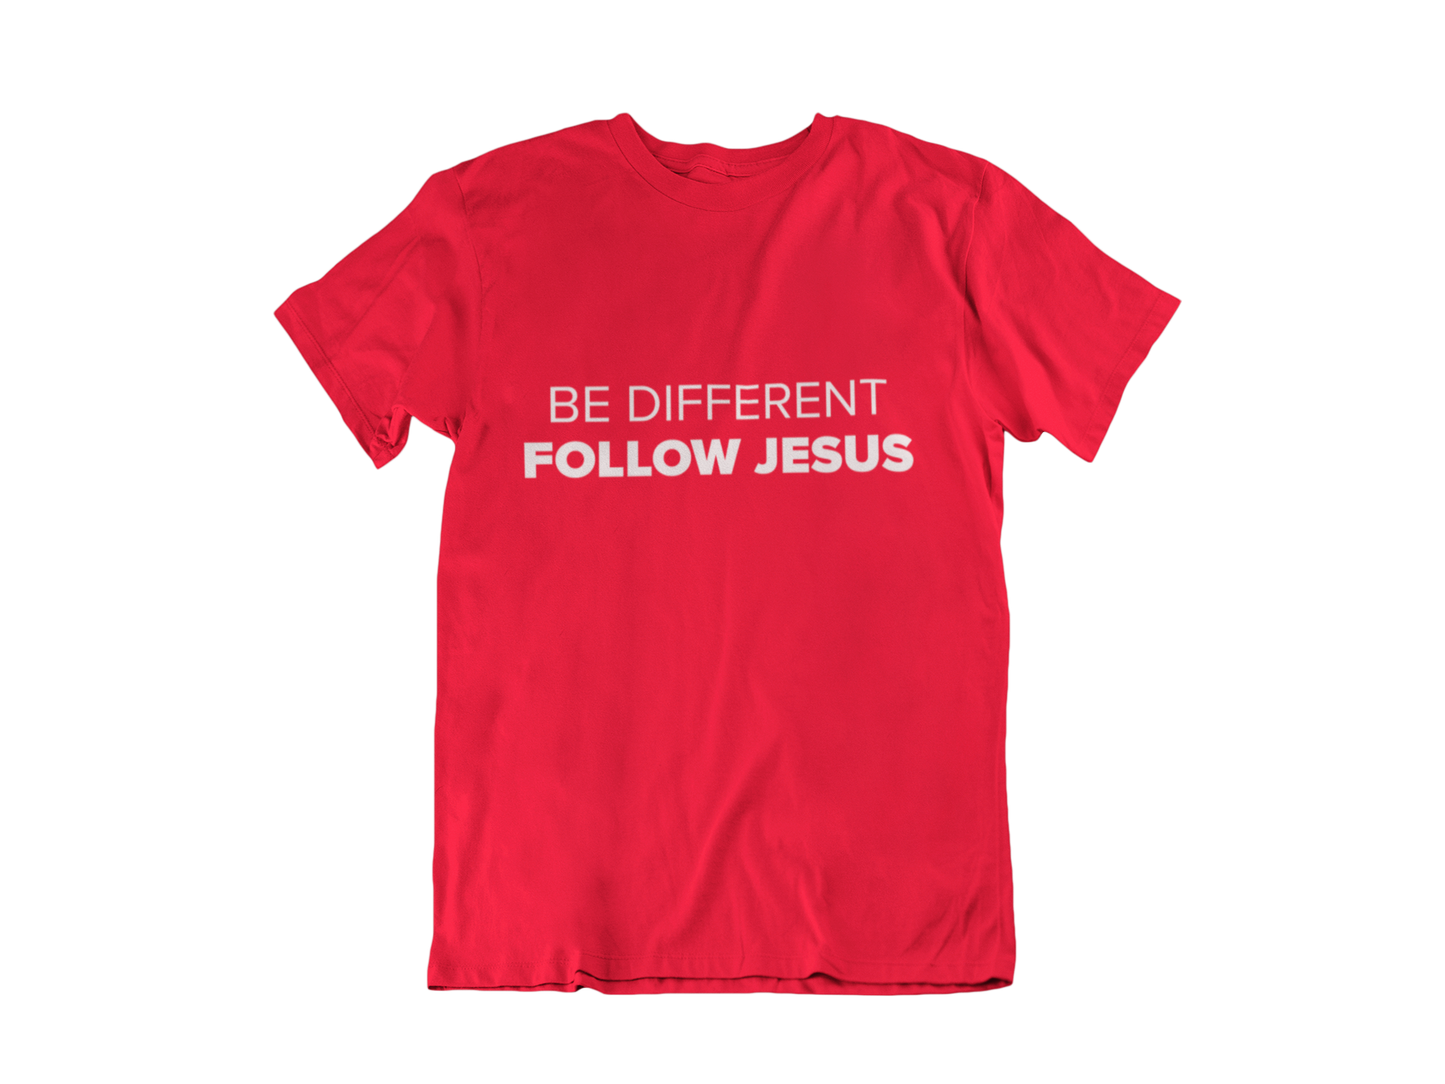 BE DIFFERENT FOLLOW JESUS RED - CHRISTIAN CLOTHING